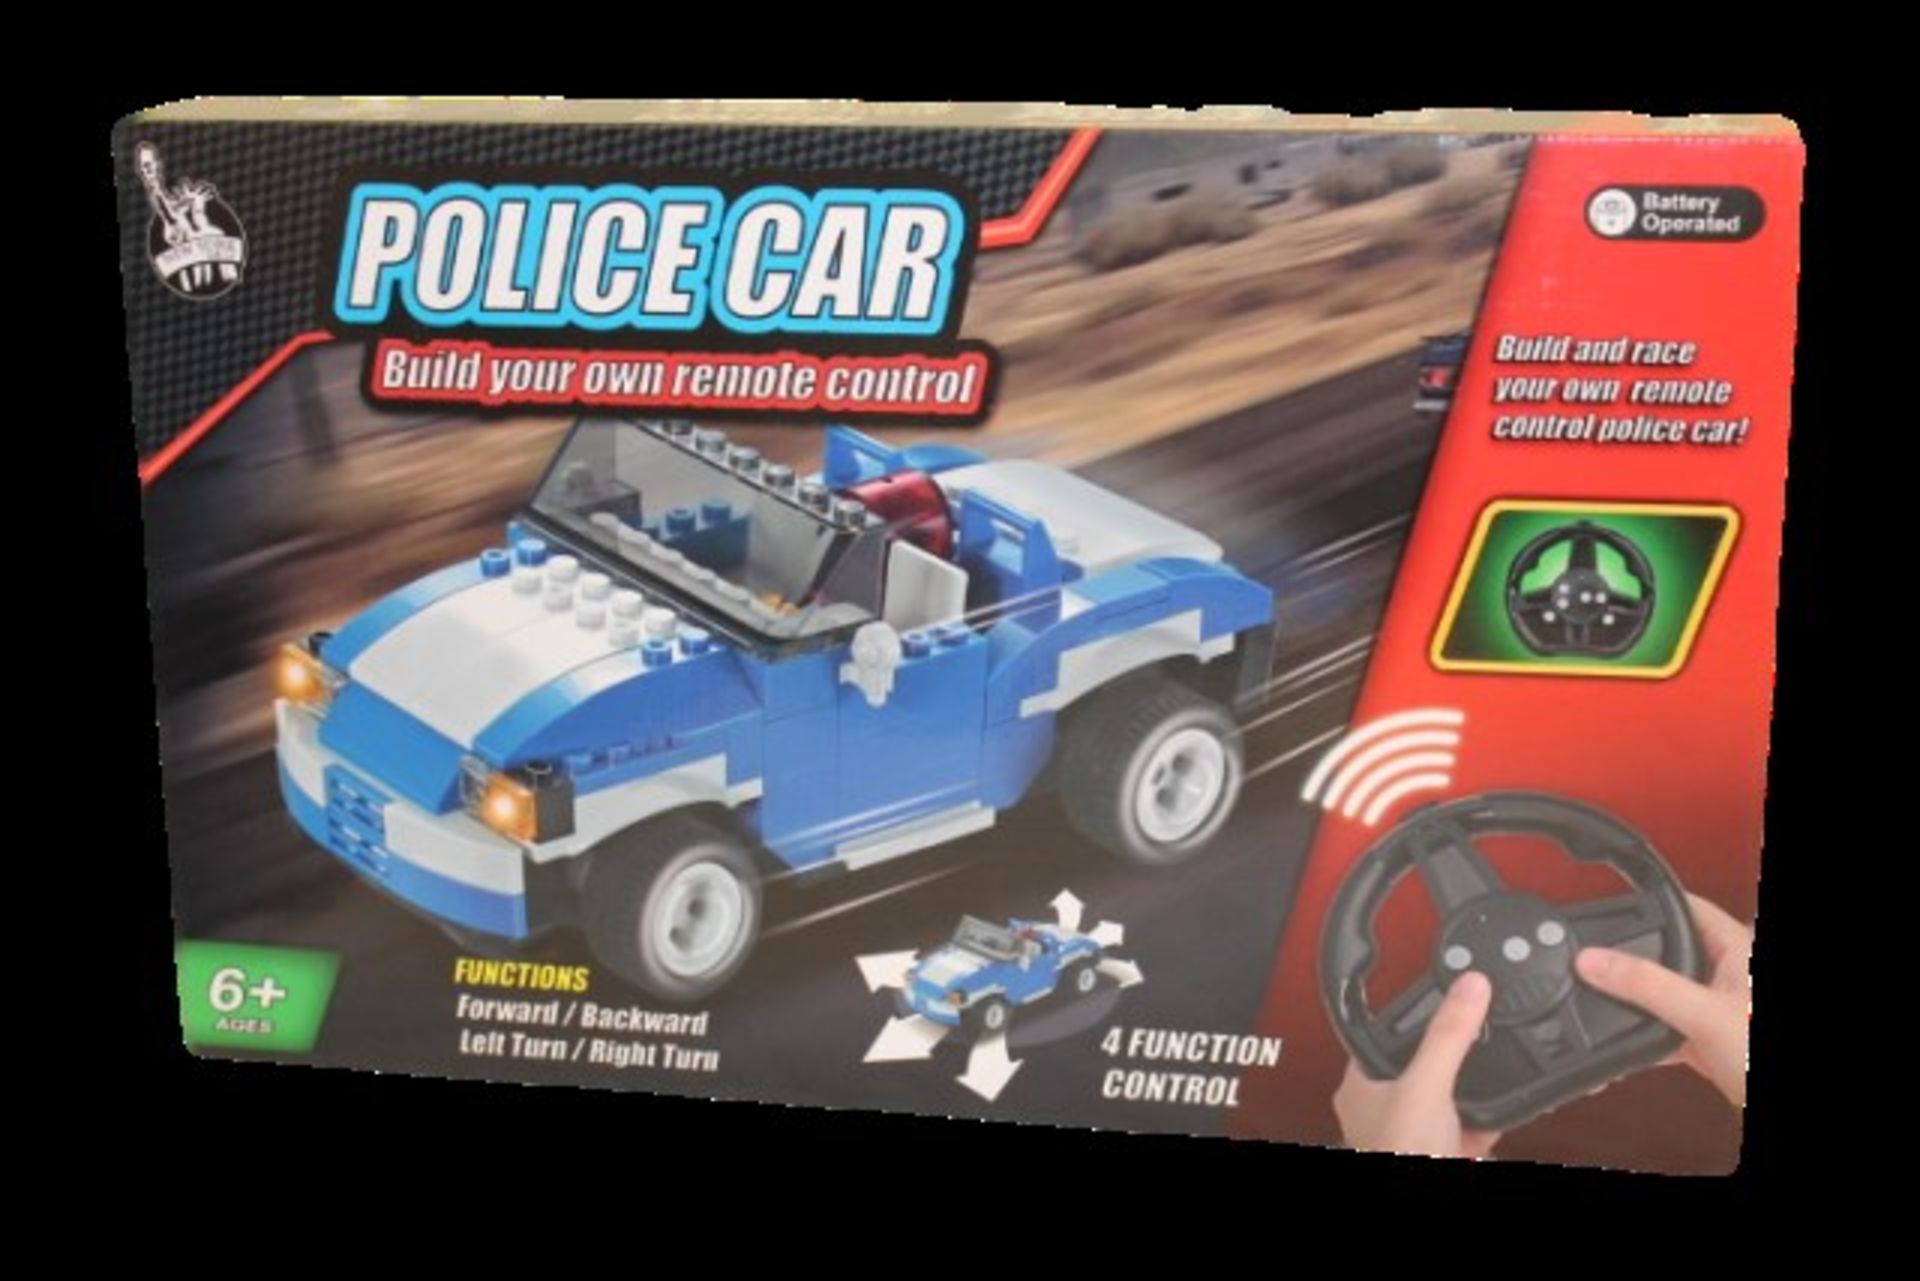 V *TRADE QTY* Brand New Radio Controlled Build your own Police Car Full function r/c Matches Lego